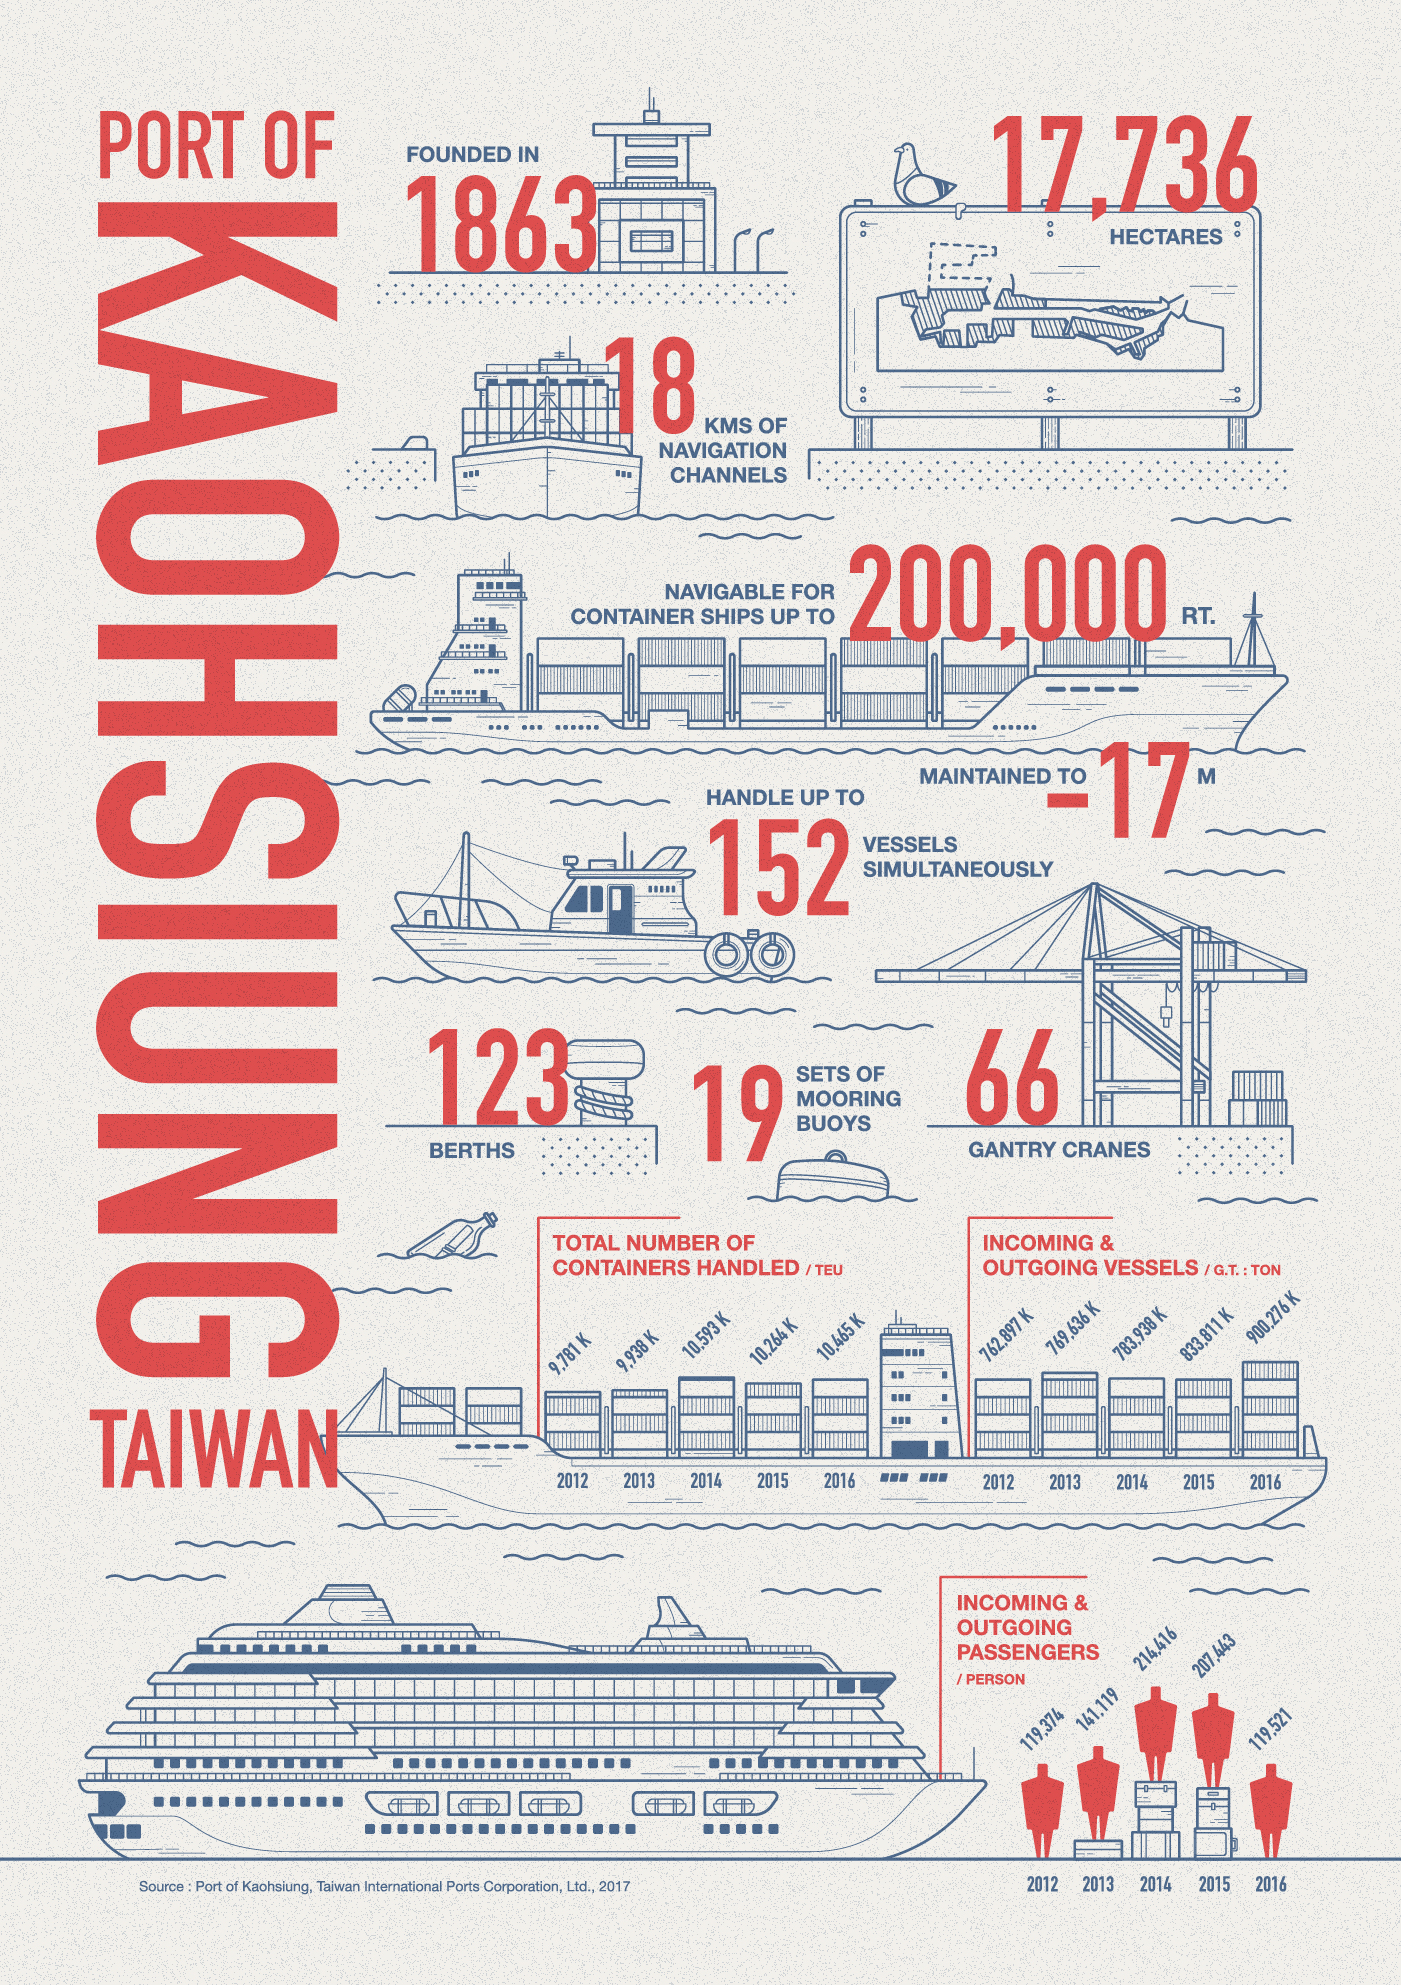 Ying-Hsiu Chen : Infographic of Port of Kaohsiung